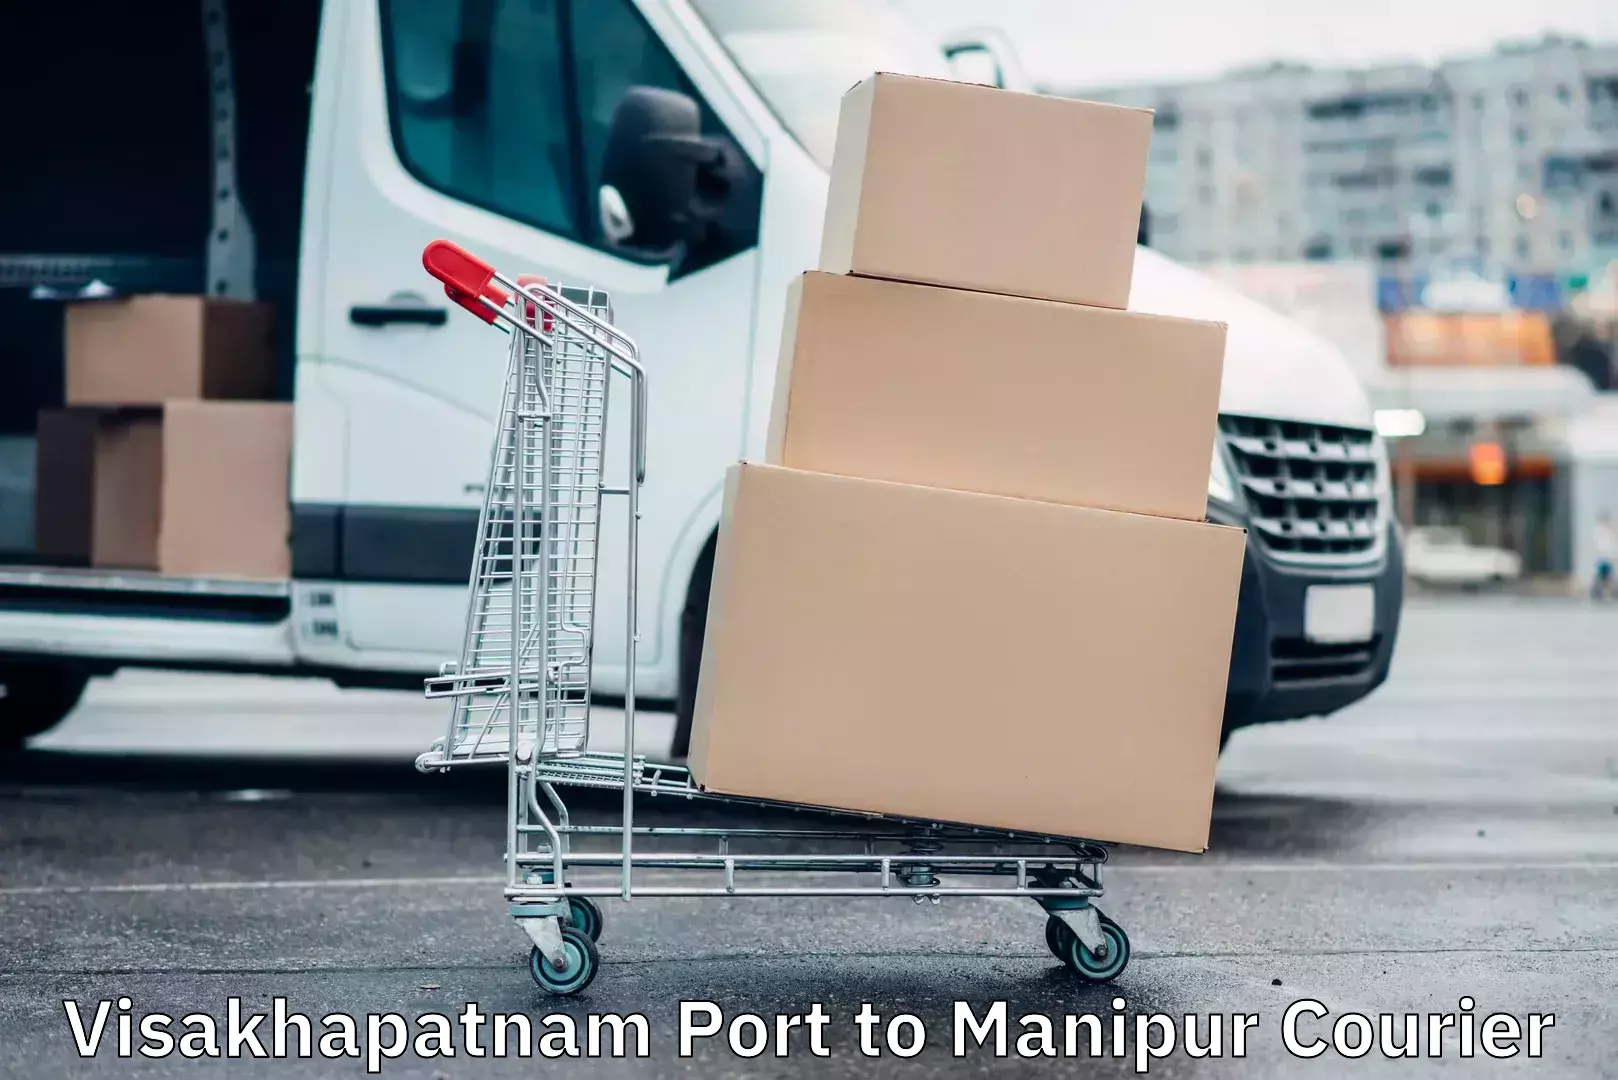 Express delivery network Visakhapatnam Port to Manipur